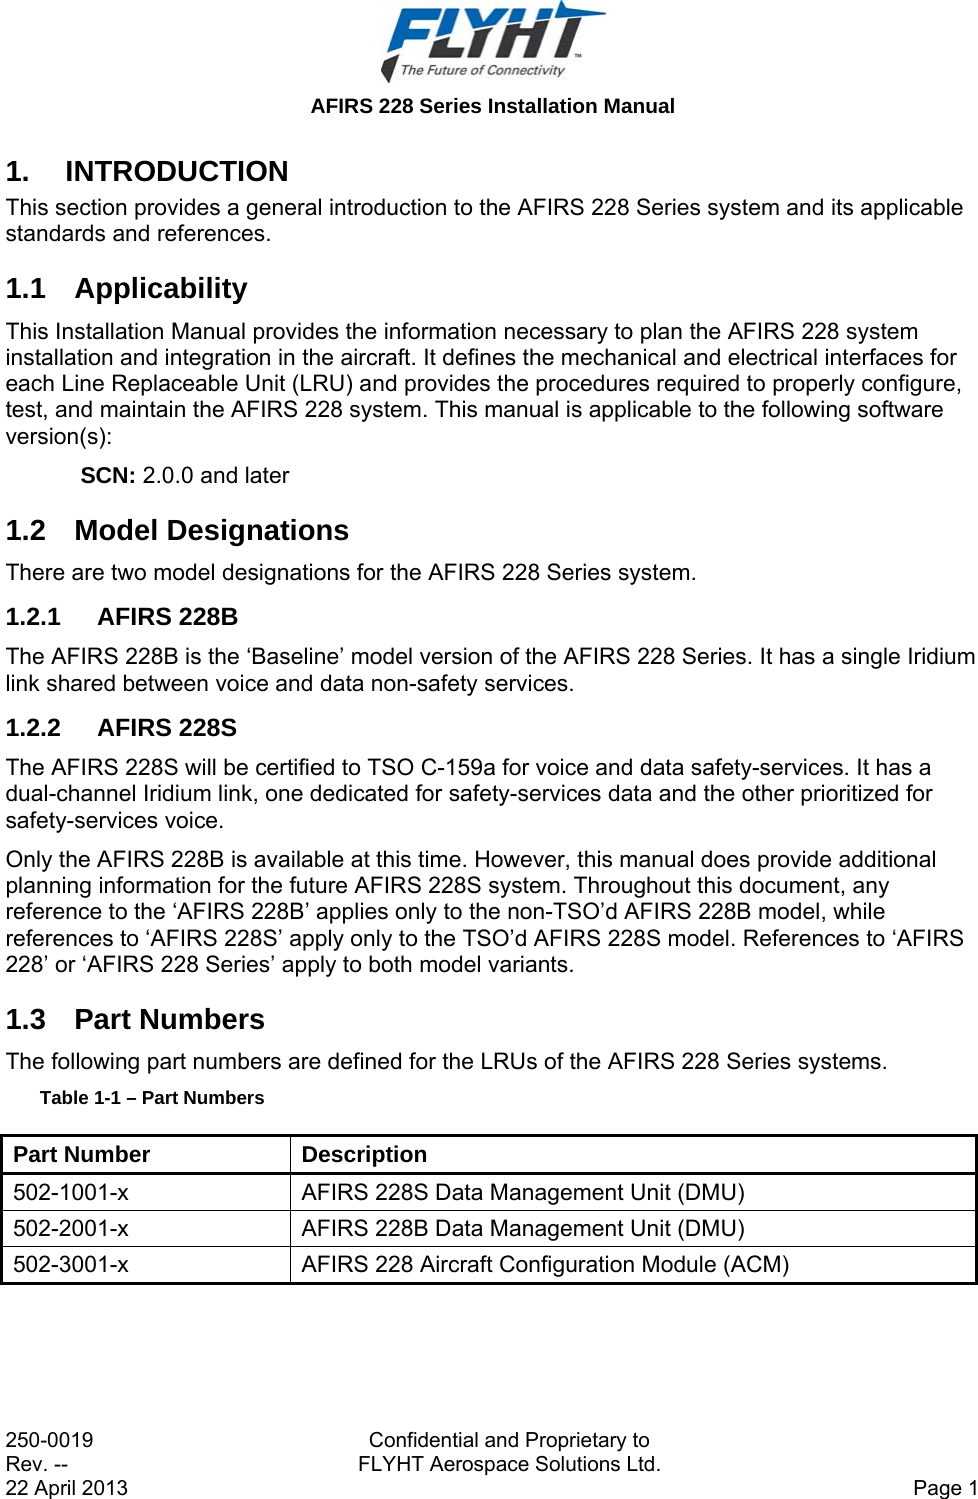  AFIRS 228 Series Installation Manual 250-0019  Confidential and Proprietary to Rev. --  FLYHT Aerospace Solutions Ltd. 22 April 2013    Page 1 1. INTRODUCTION This section provides a general introduction to the AFIRS 228 Series system and its applicable standards and references.  1.1 Applicability This Installation Manual provides the information necessary to plan the AFIRS 228 system installation and integration in the aircraft. It defines the mechanical and electrical interfaces for each Line Replaceable Unit (LRU) and provides the procedures required to properly configure, test, and maintain the AFIRS 228 system. This manual is applicable to the following software version(s): SCN: 2.0.0 and later 1.2 Model Designations There are two model designations for the AFIRS 228 Series system. 1.2.1 AFIRS 228B The AFIRS 228B is the ‘Baseline’ model version of the AFIRS 228 Series. It has a single Iridium link shared between voice and data non-safety services. 1.2.2 AFIRS 228S The AFIRS 228S will be certified to TSO C-159a for voice and data safety-services. It has a dual-channel Iridium link, one dedicated for safety-services data and the other prioritized for safety-services voice. Only the AFIRS 228B is available at this time. However, this manual does provide additional planning information for the future AFIRS 228S system. Throughout this document, any reference to the ‘AFIRS 228B’ applies only to the non-TSO’d AFIRS 228B model, while references to ‘AFIRS 228S’ apply only to the TSO’d AFIRS 228S model. References to ‘AFIRS 228’ or ‘AFIRS 228 Series’ apply to both model variants. 1.3 Part Numbers The following part numbers are defined for the LRUs of the AFIRS 228 Series systems. Table 1-1 – Part Numbers Part Number  Description 502-1001-x  AFIRS 228S Data Management Unit (DMU) 502-2001-x  AFIRS 228B Data Management Unit (DMU) 502-3001-x  AFIRS 228 Aircraft Configuration Module (ACM)    